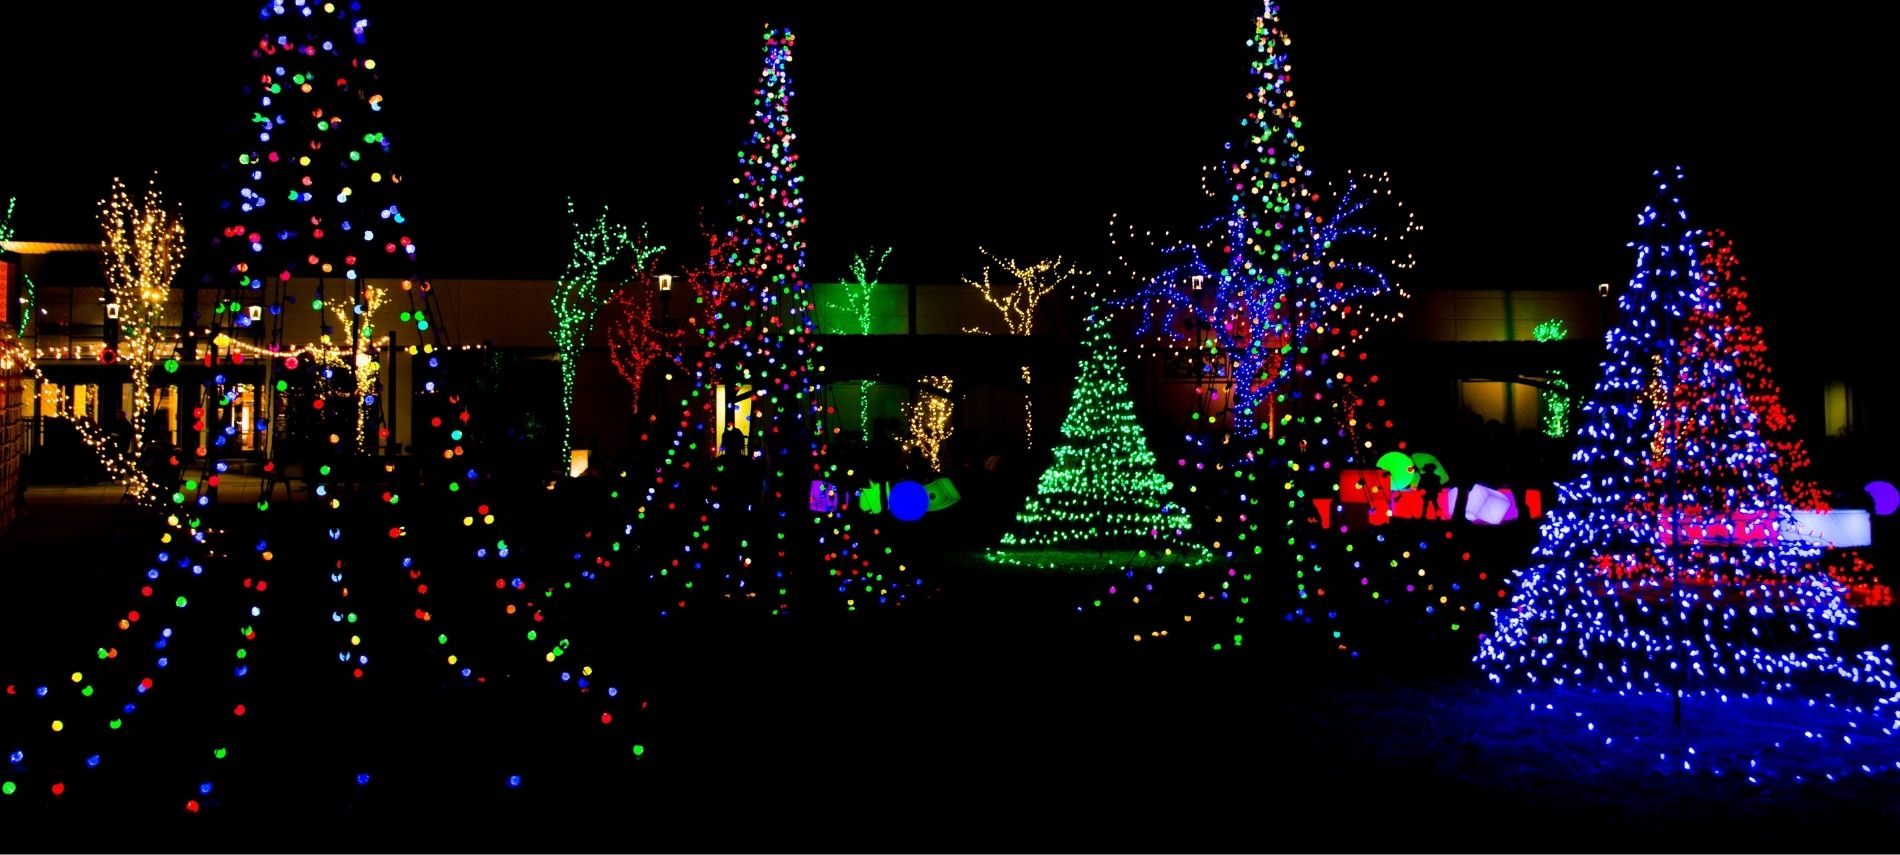 Large yard with several trees lit up with multi-colored Christmas lights